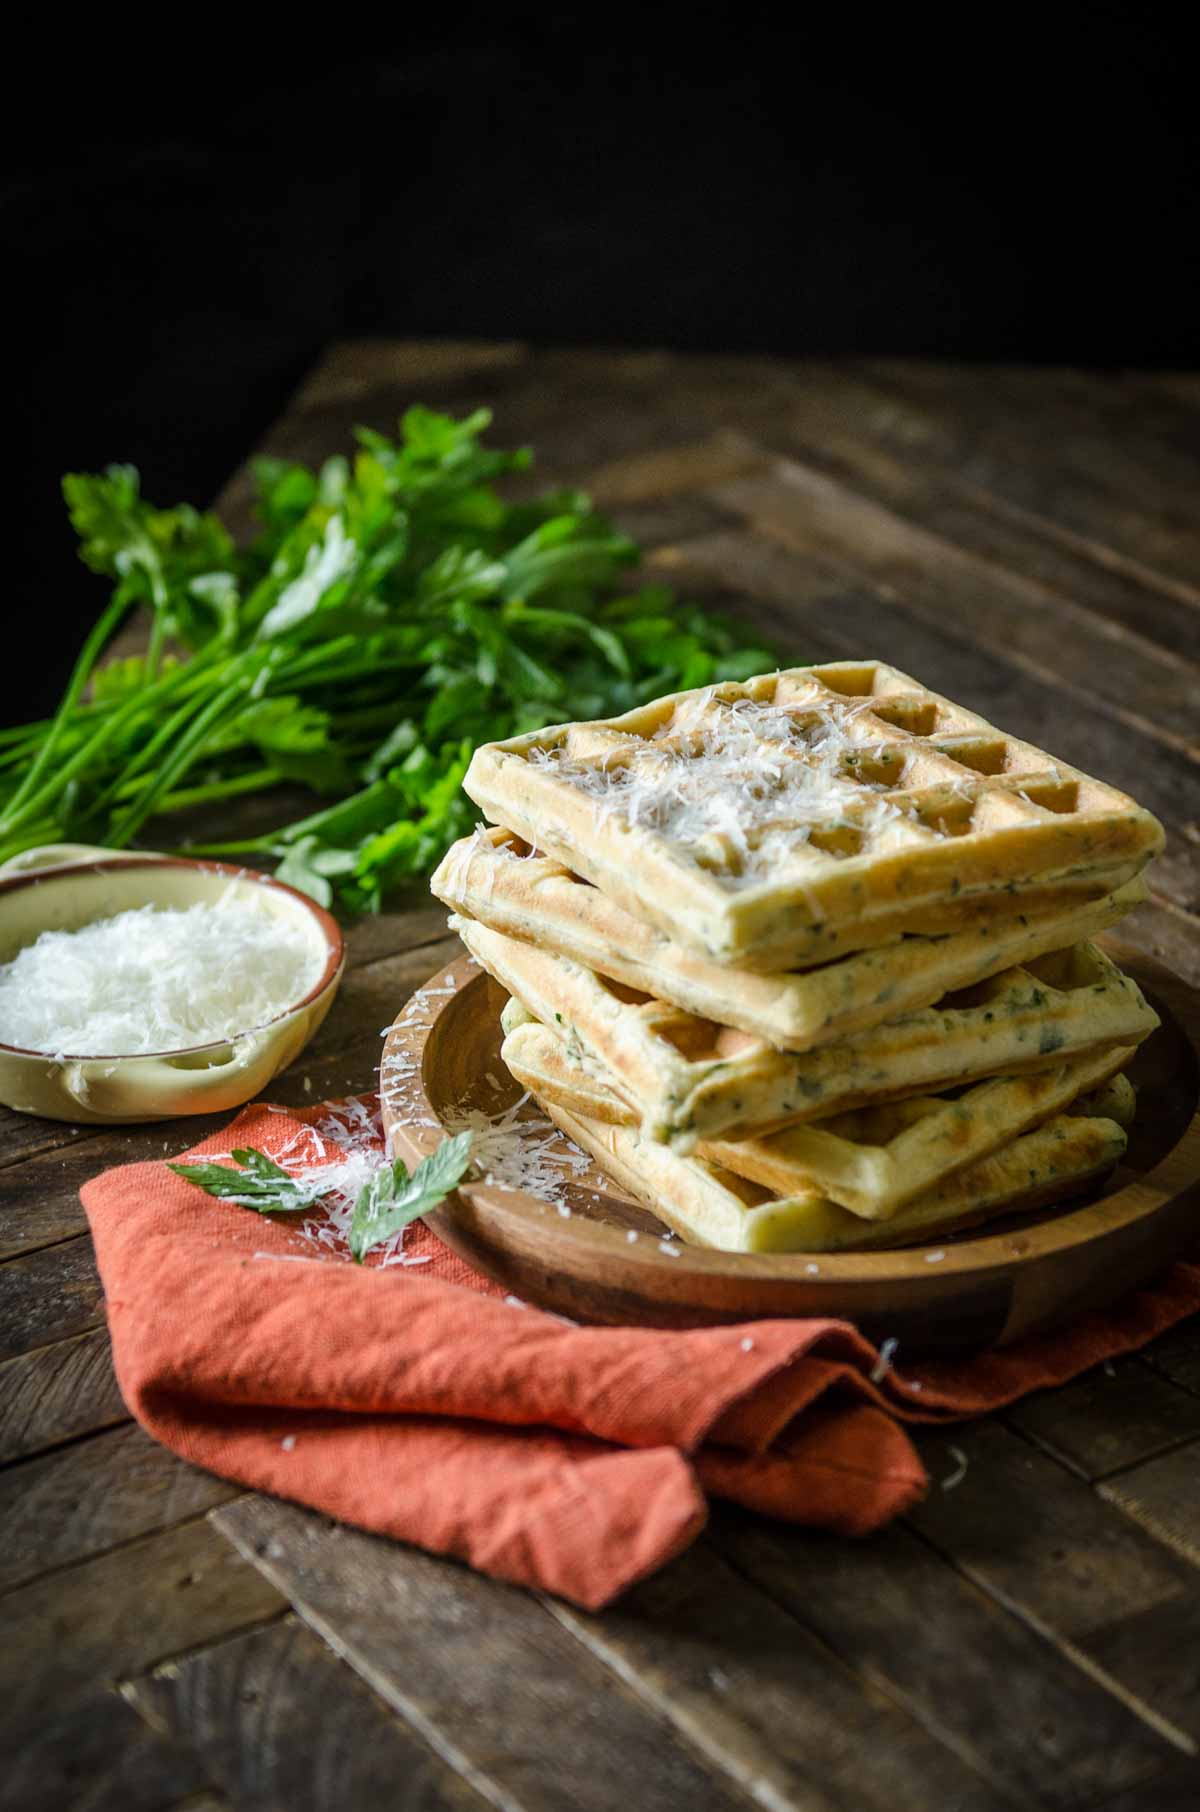 Parmesan and Parsley Savory Waffles | Chew Town Food Blog